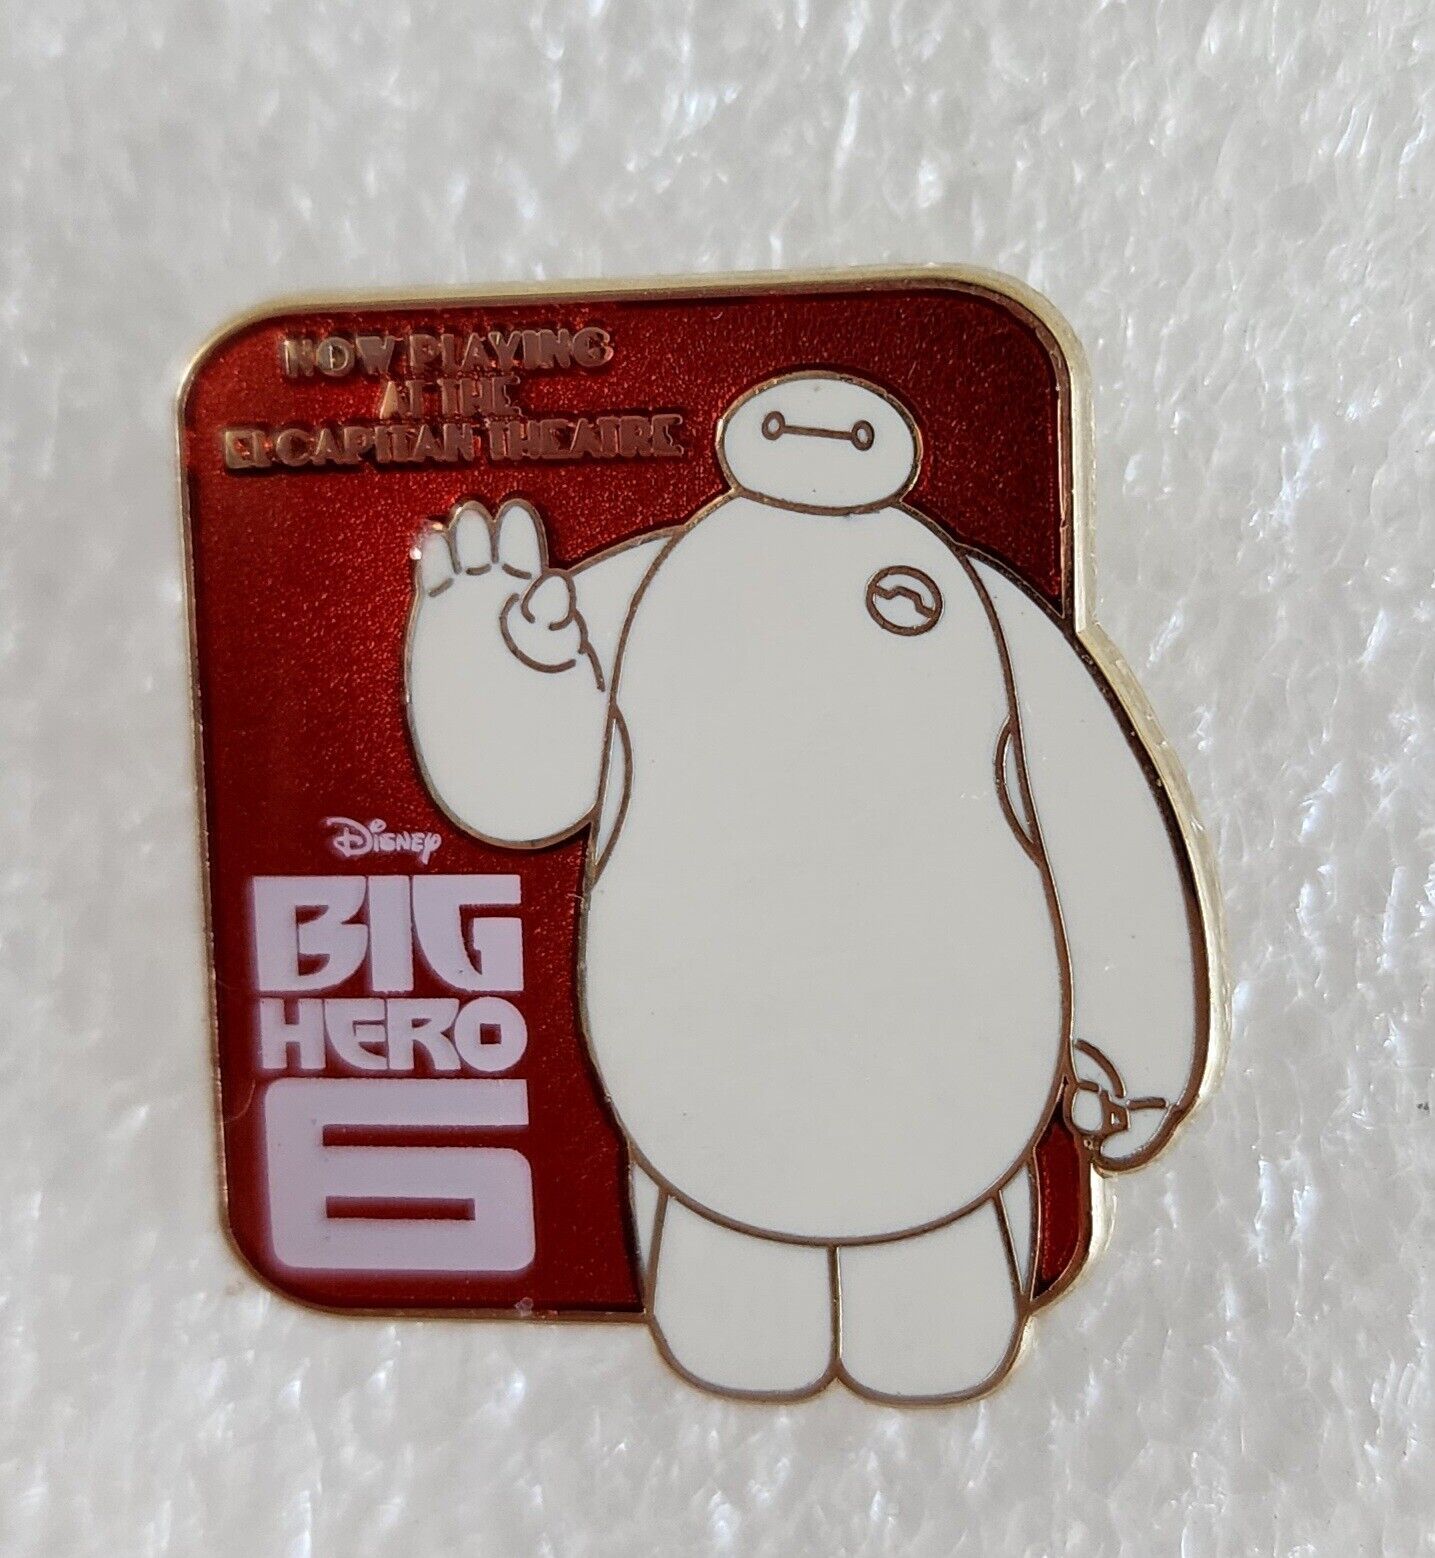 DSSH DSF BIG HERO 6 Now Playing BAYMAX PIN TRADERS DELIGH LE 1500 PIN-FREE SHPG